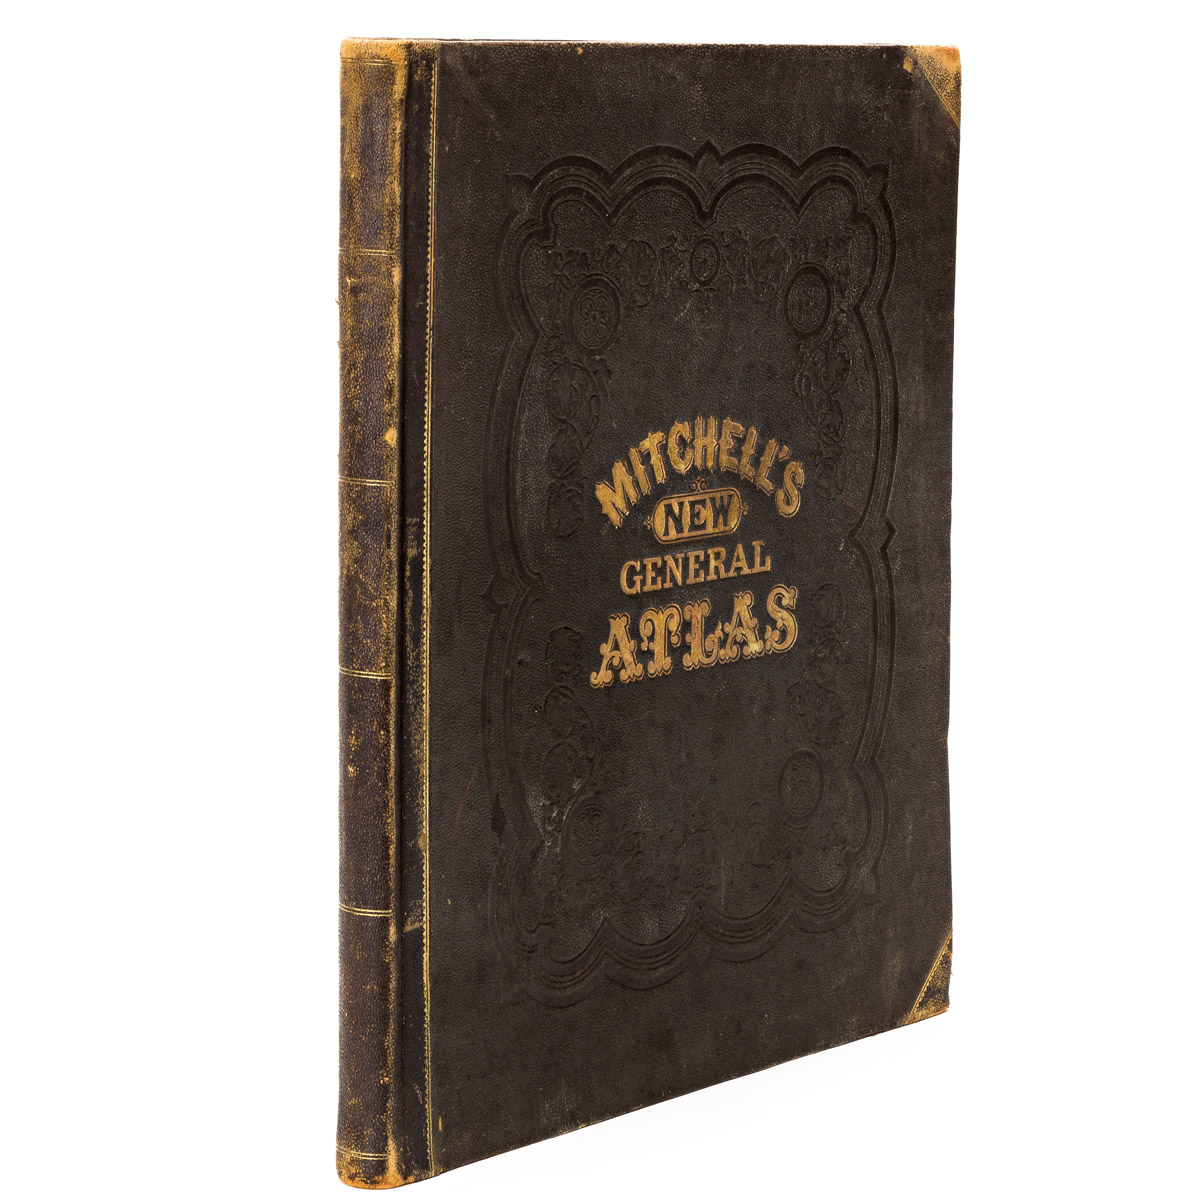 Mitchell's New General Atlas, Containing Maps of the Various Countries of the World, Plans of Cities, etc.